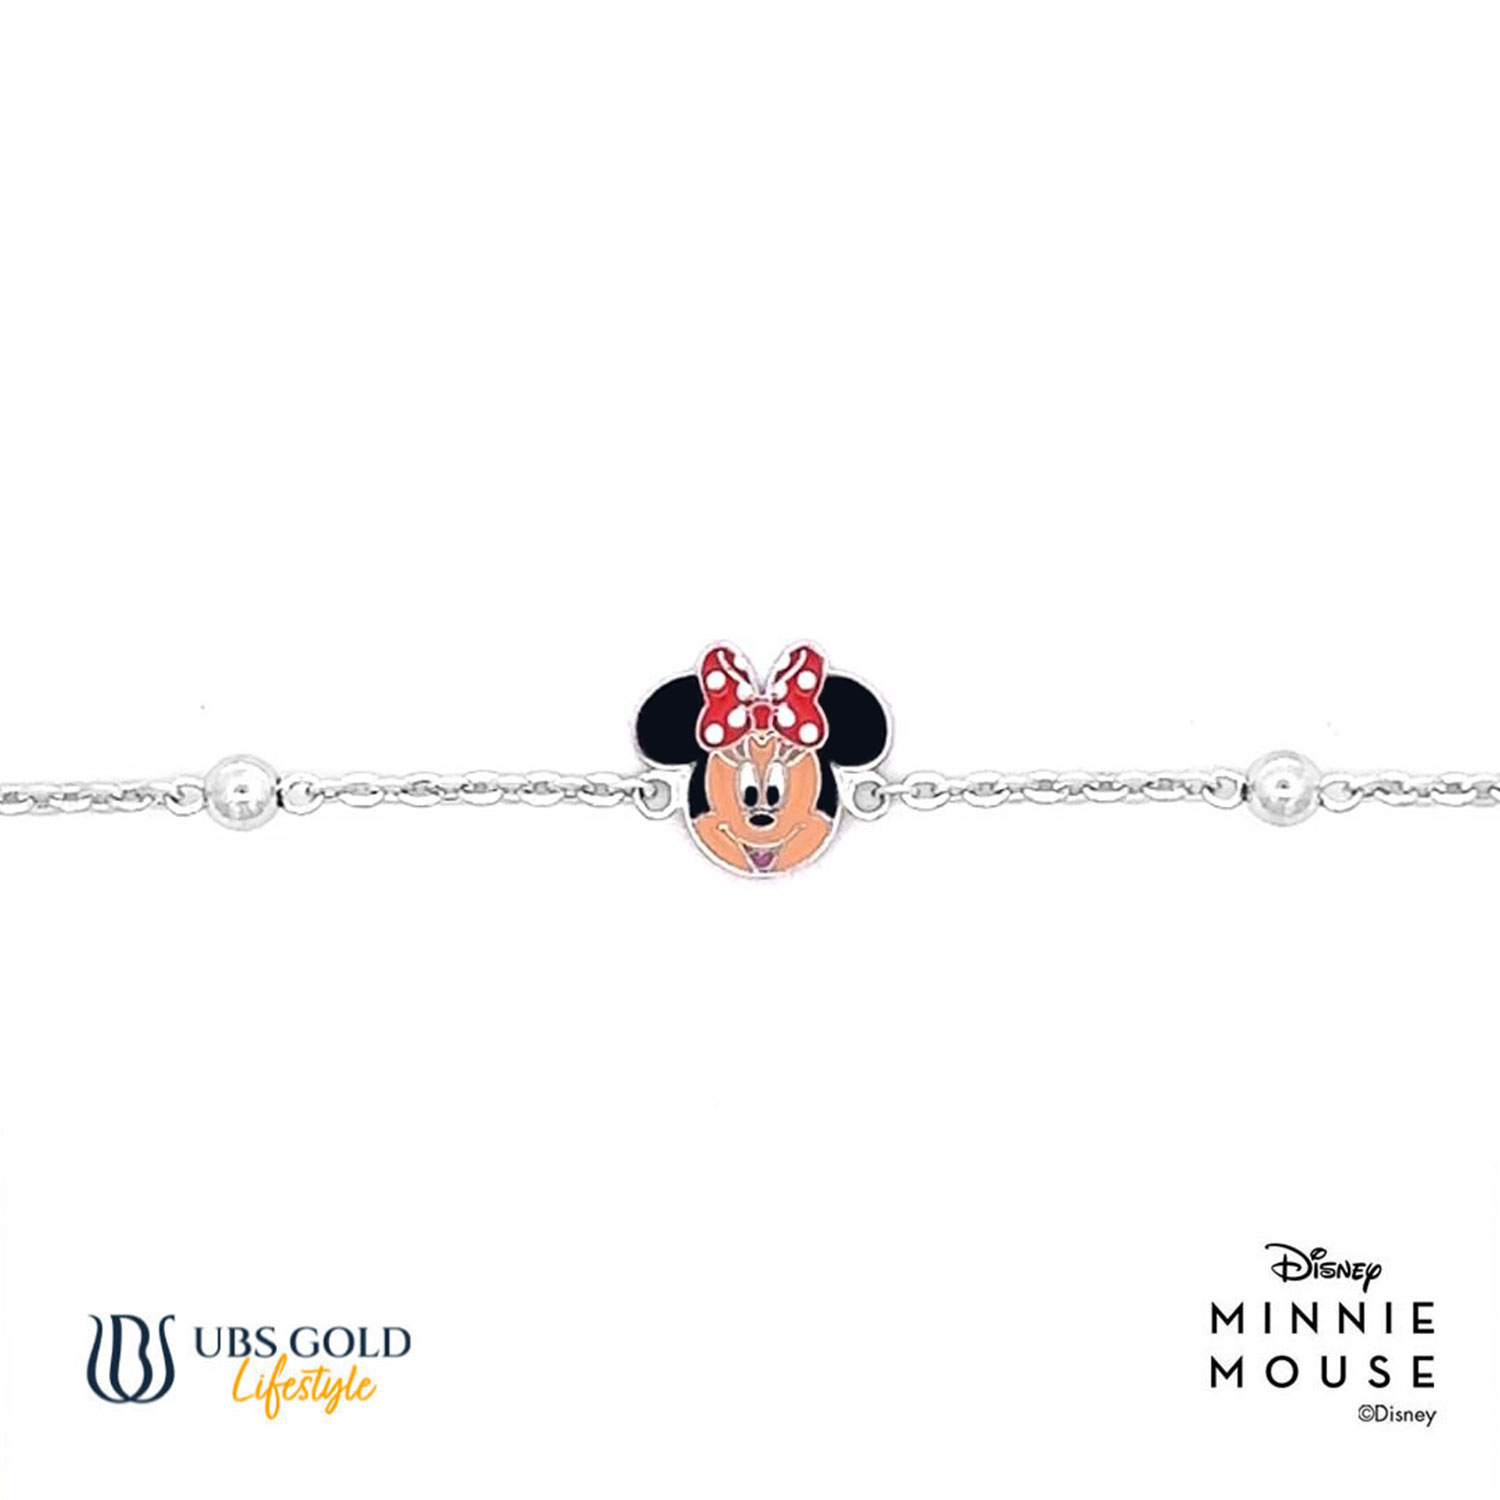 UBS Gelang Emas Anak Disney Minnie Mouse - Hgy0117 - 17K